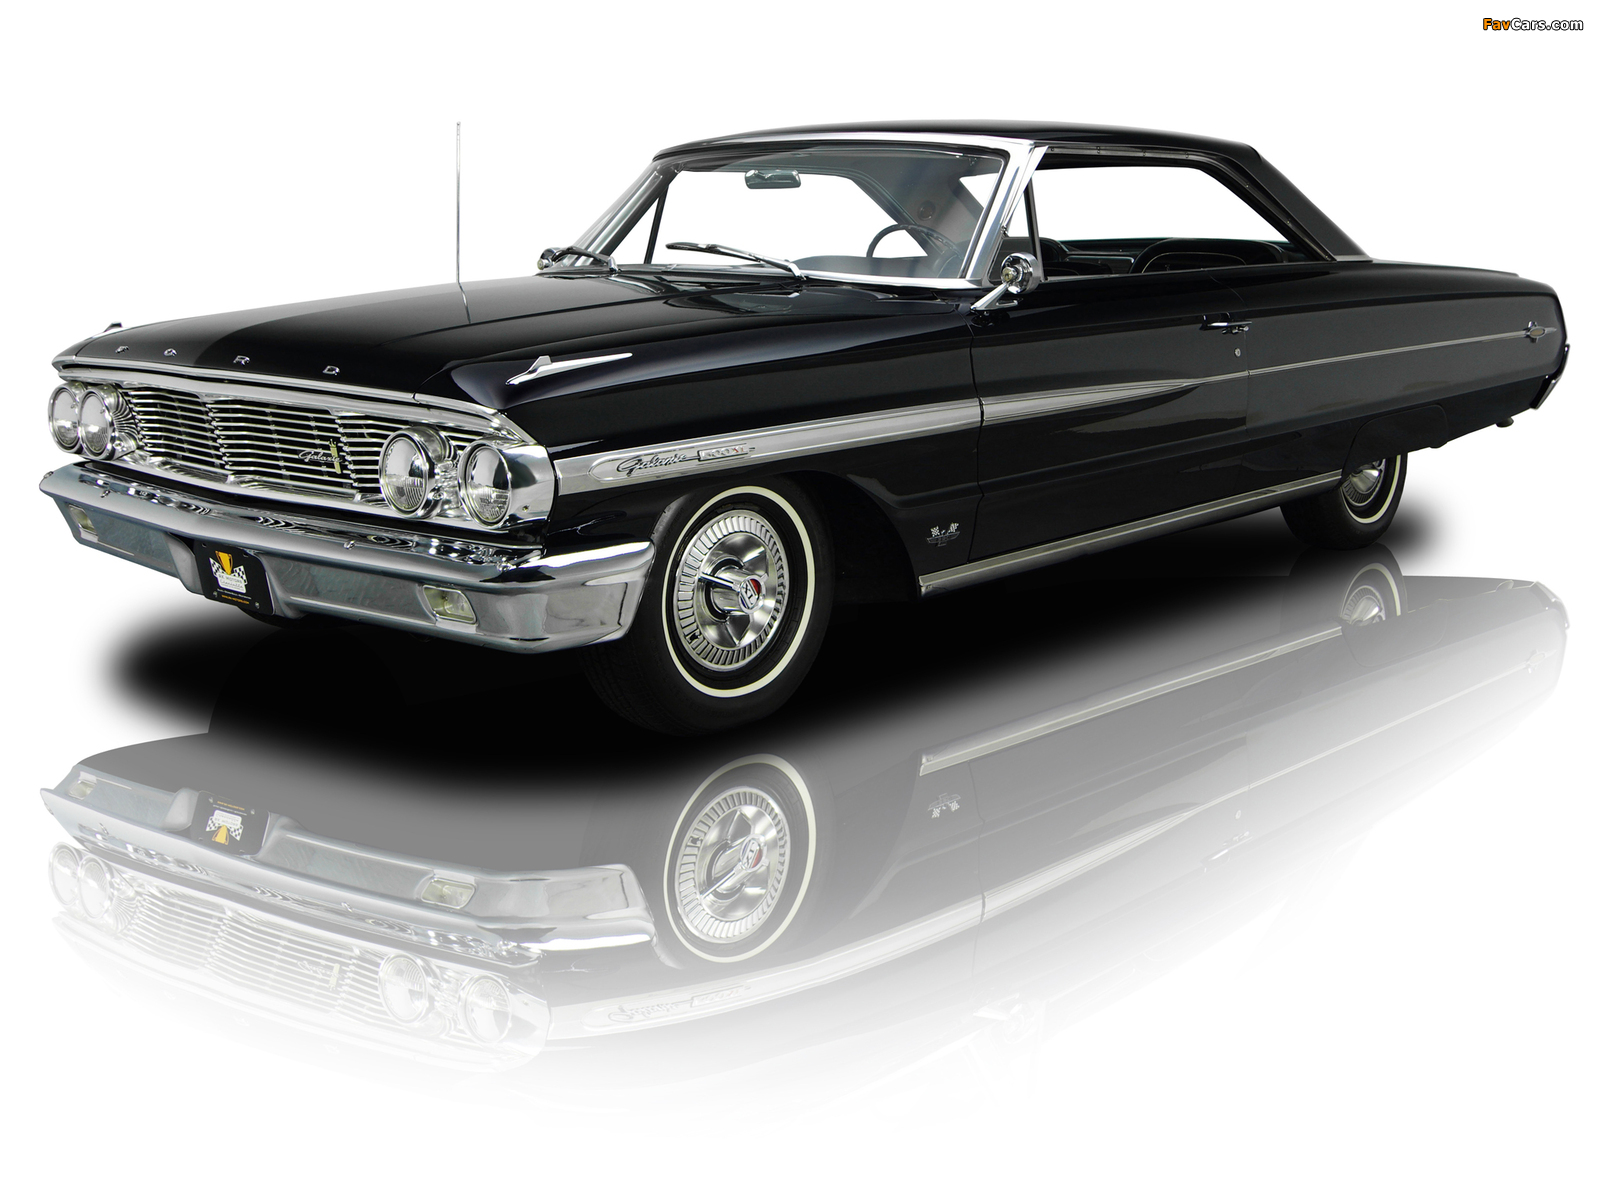 Ford Galaxie 500 XL Hardtop Coupe 1964 wallpapers (1600 x 1200)